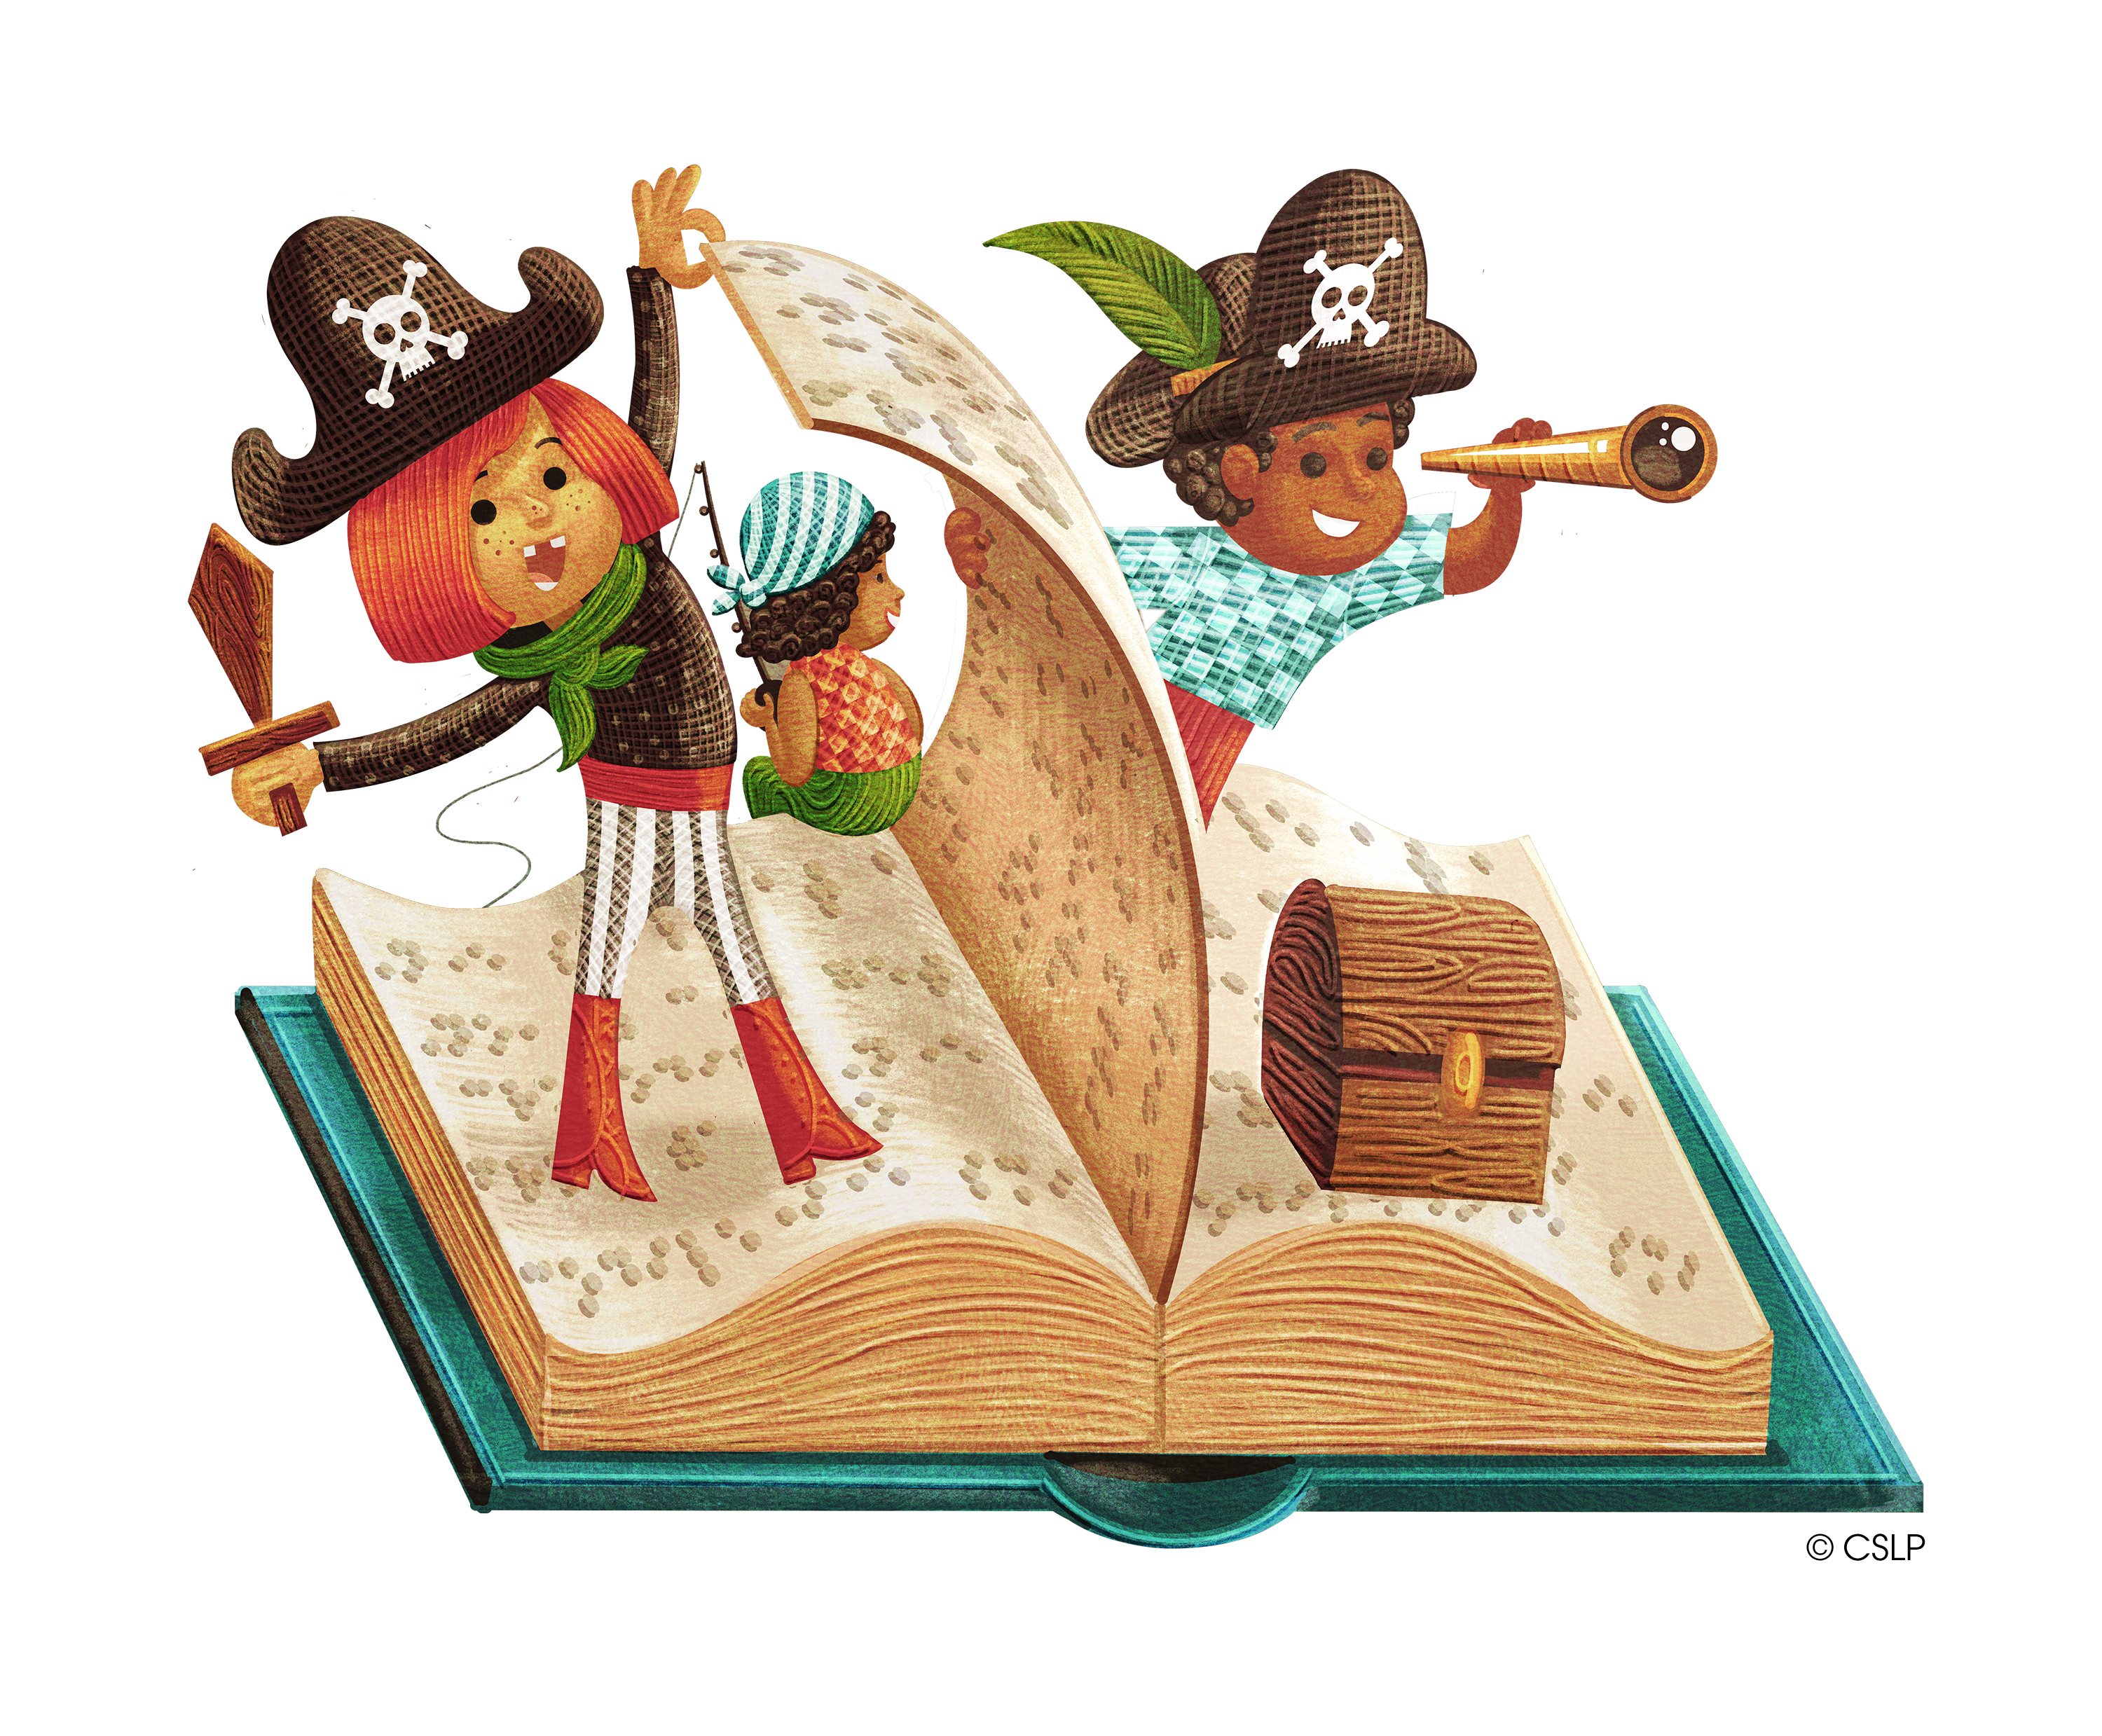 Images of the Summer Reading Pirates